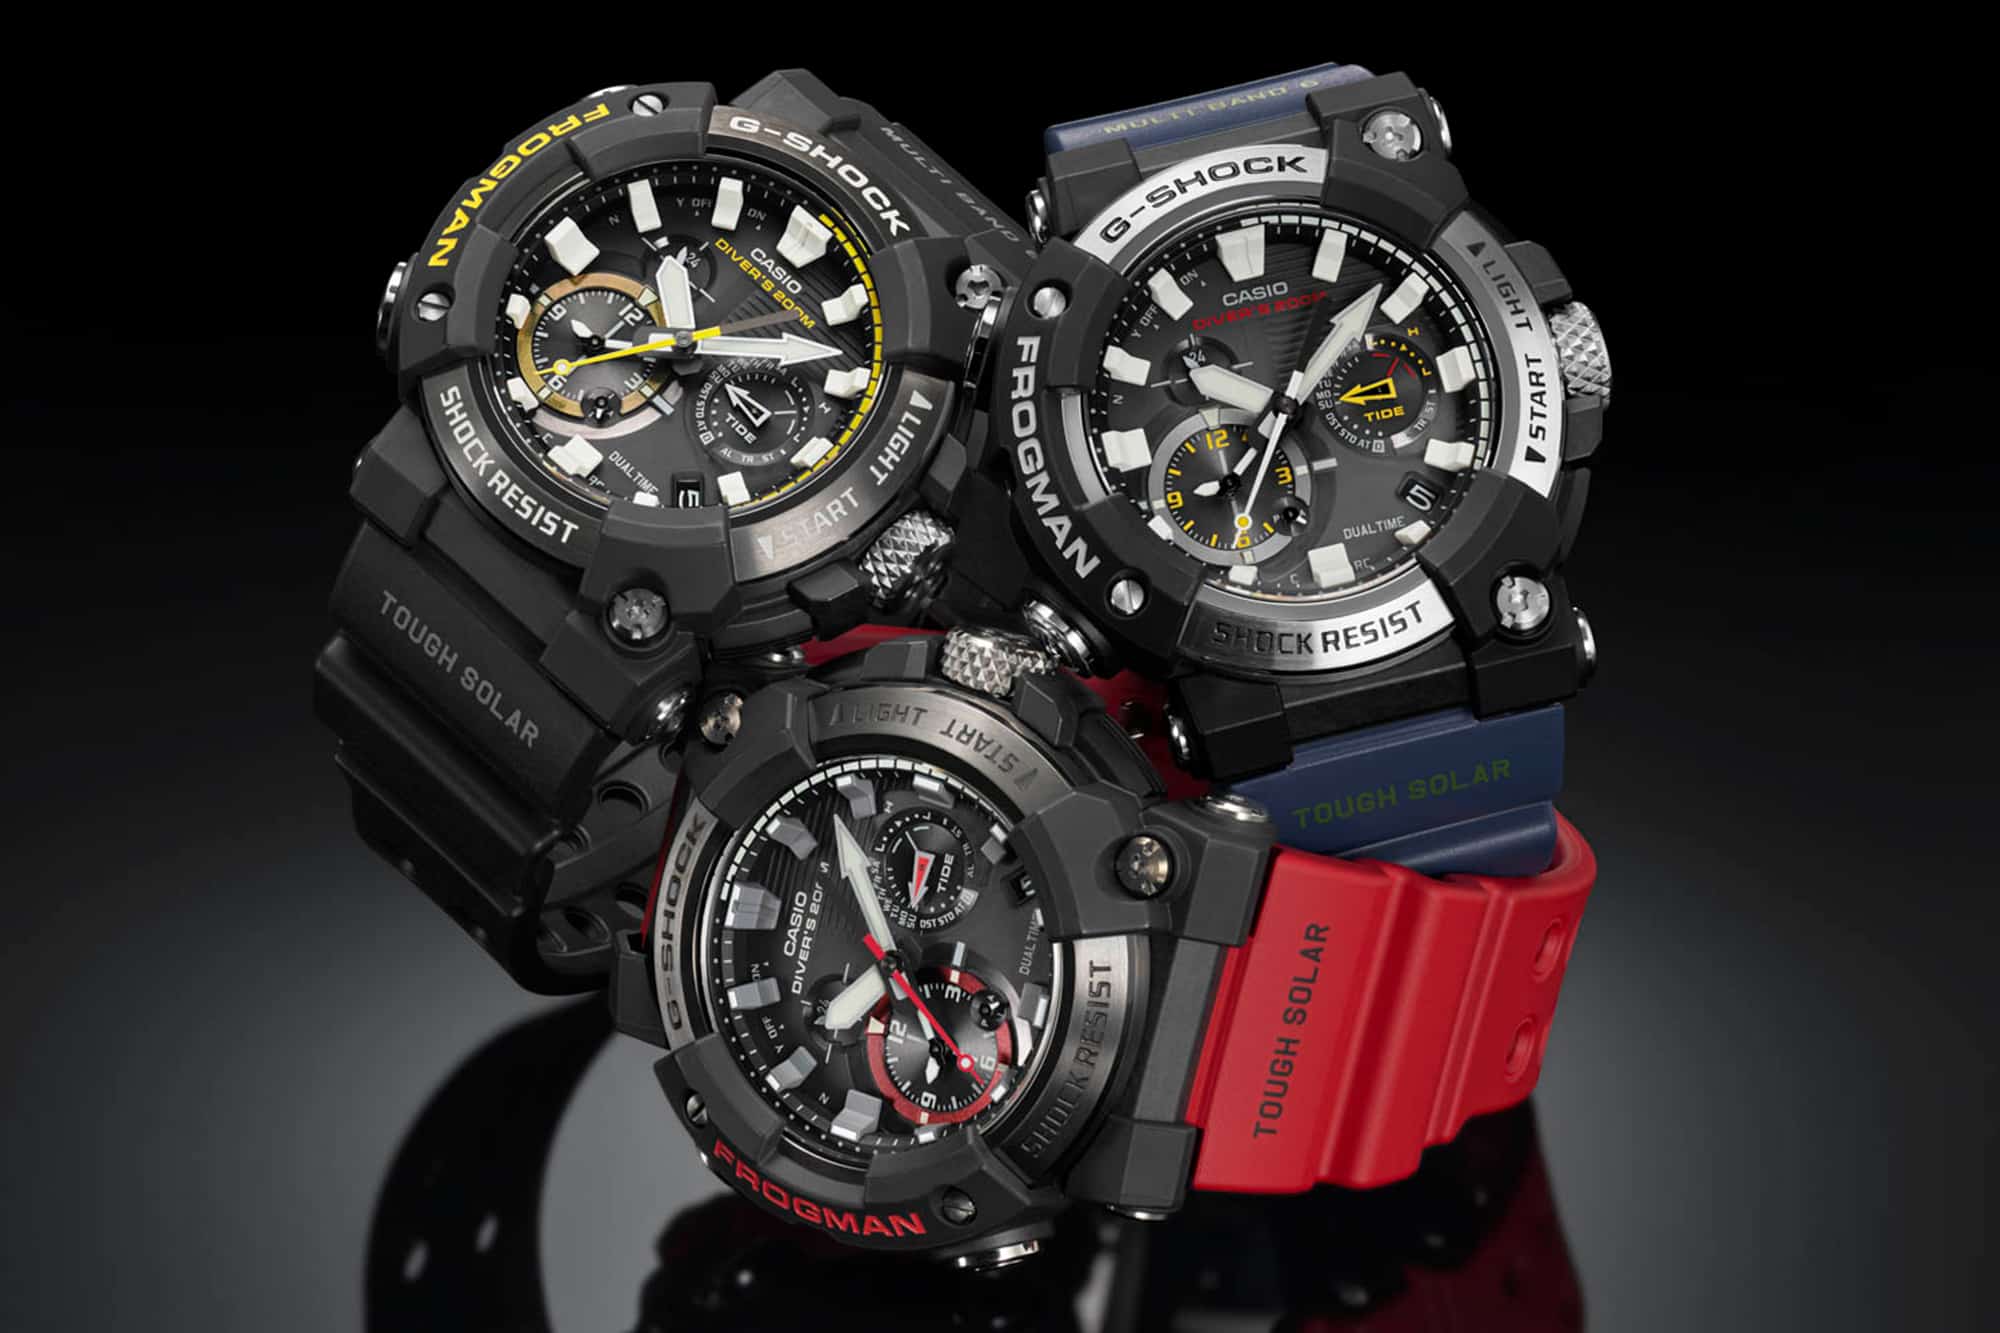 G-Shock Announces the First Frogman with a Full Analog Display